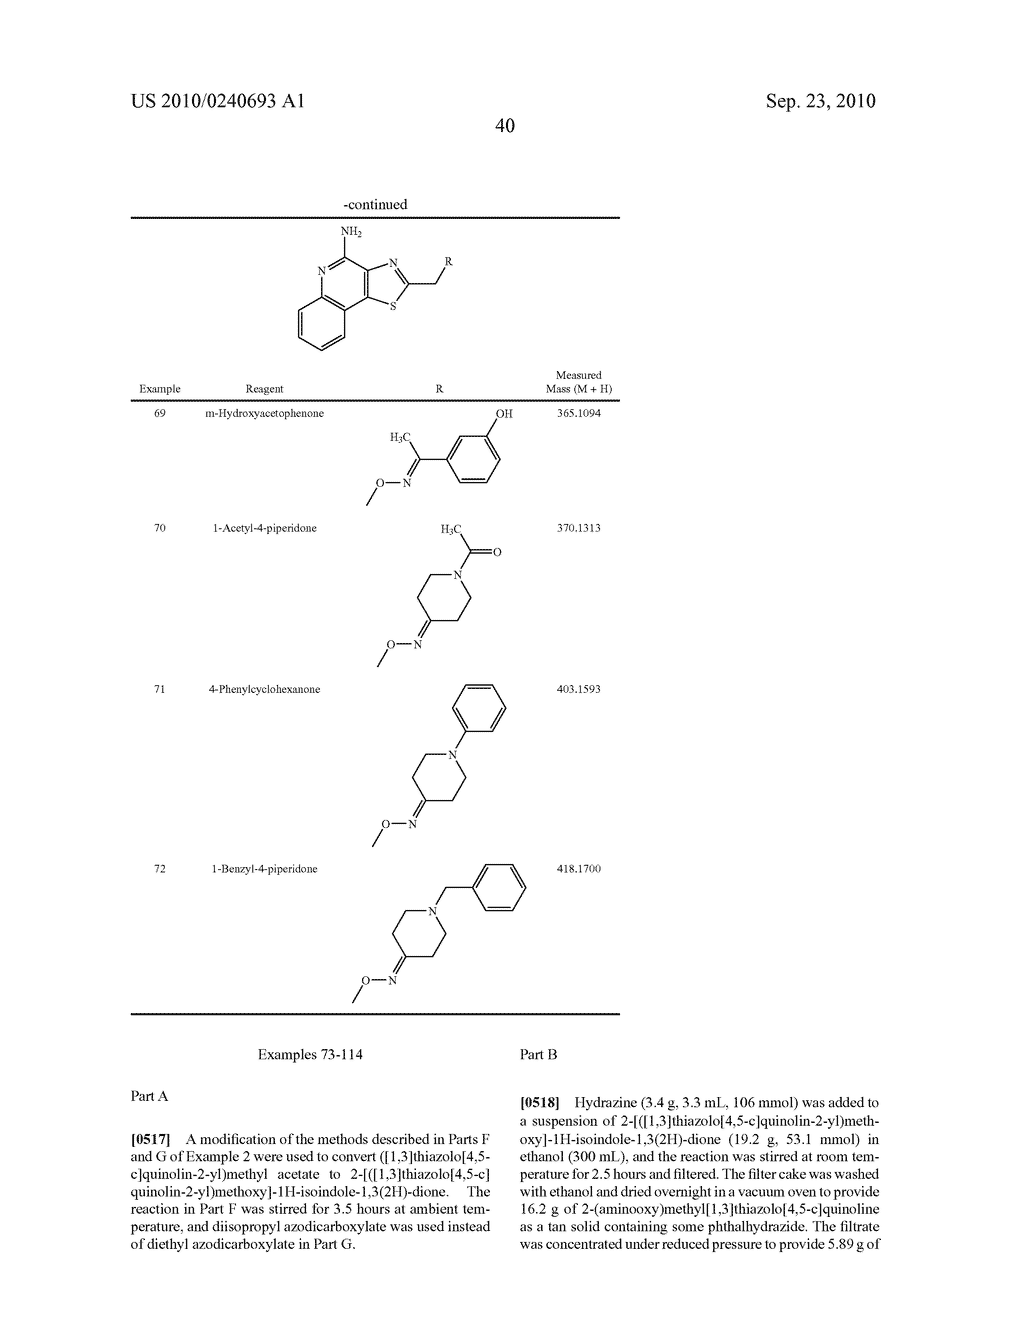  Oxime and Hydroxylamine Substituted Thiazolo [4,5-C] Ring Compounds and Methods - diagram, schematic, and image 41